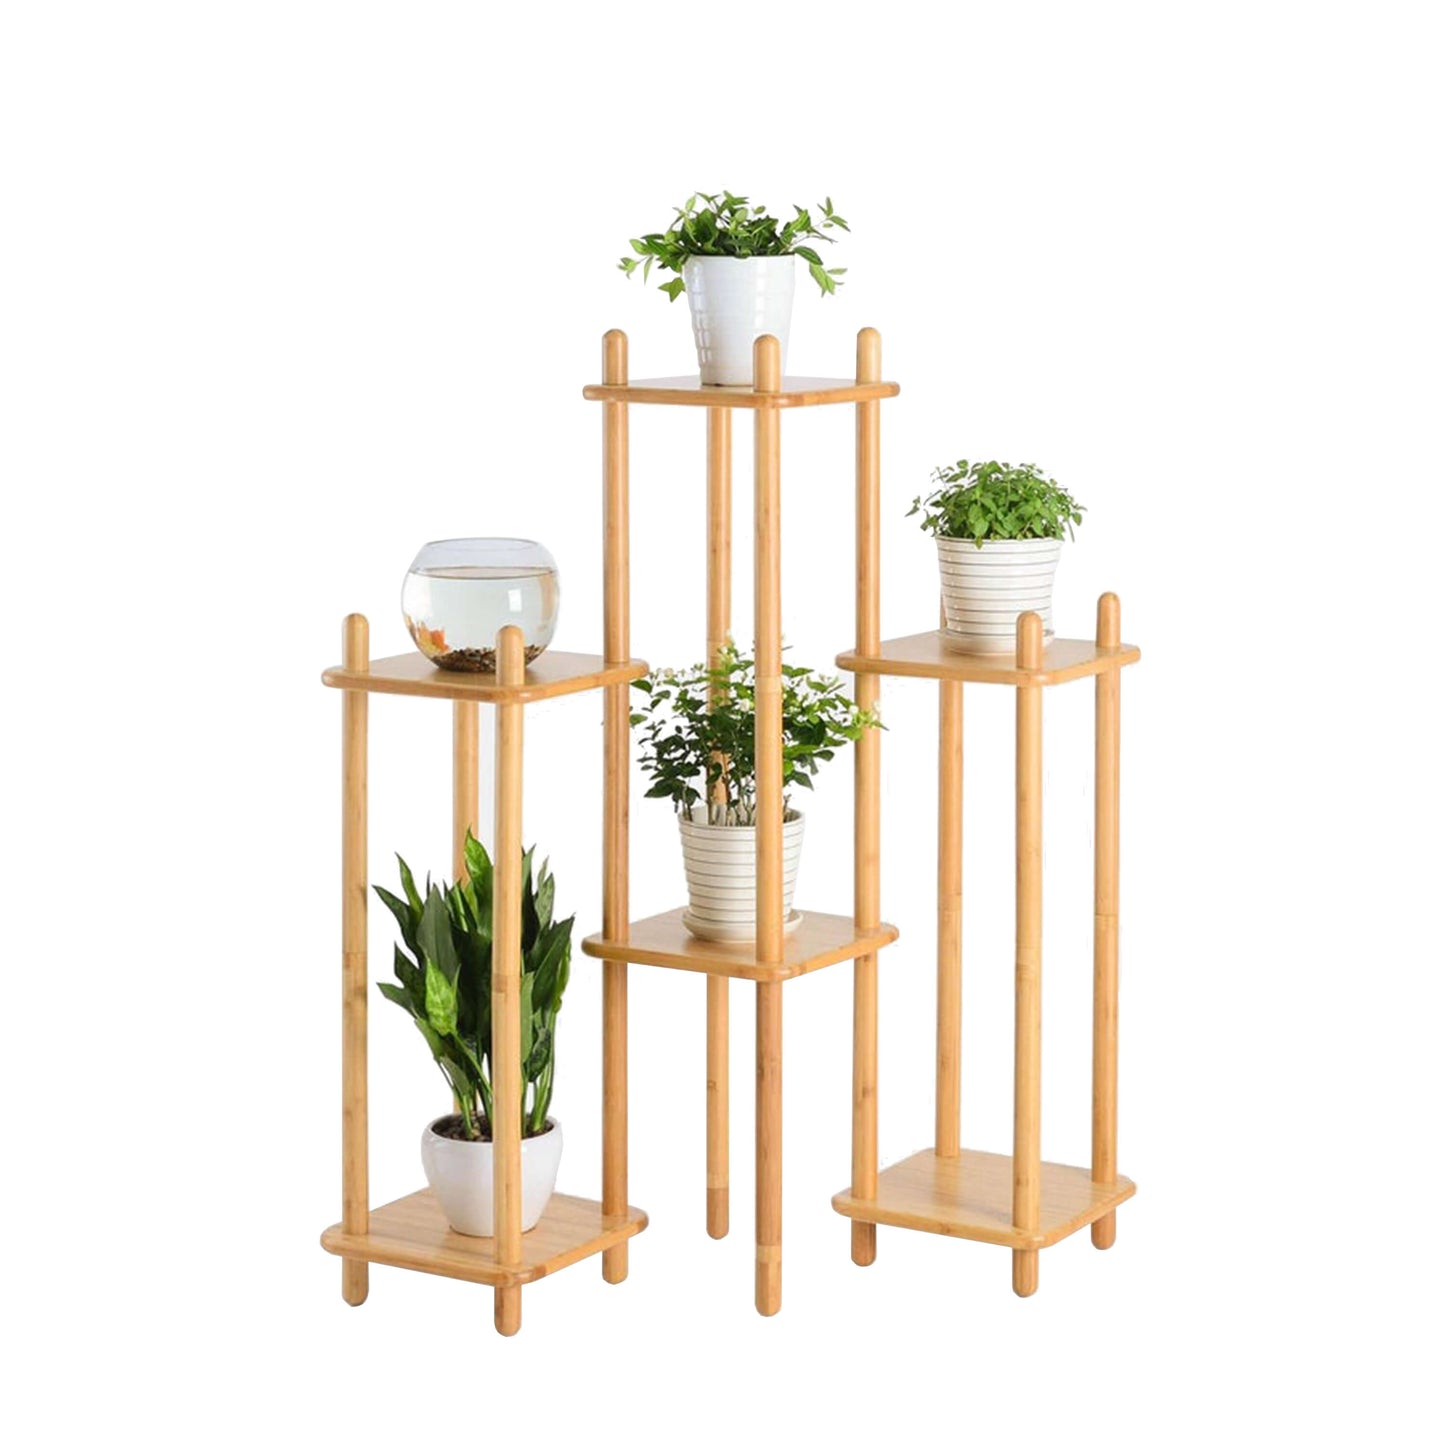 Wood Plant Stand 3Pcs | ALFA x PIY CELL Plant Stand - Window Garden Balcony Plant Holder